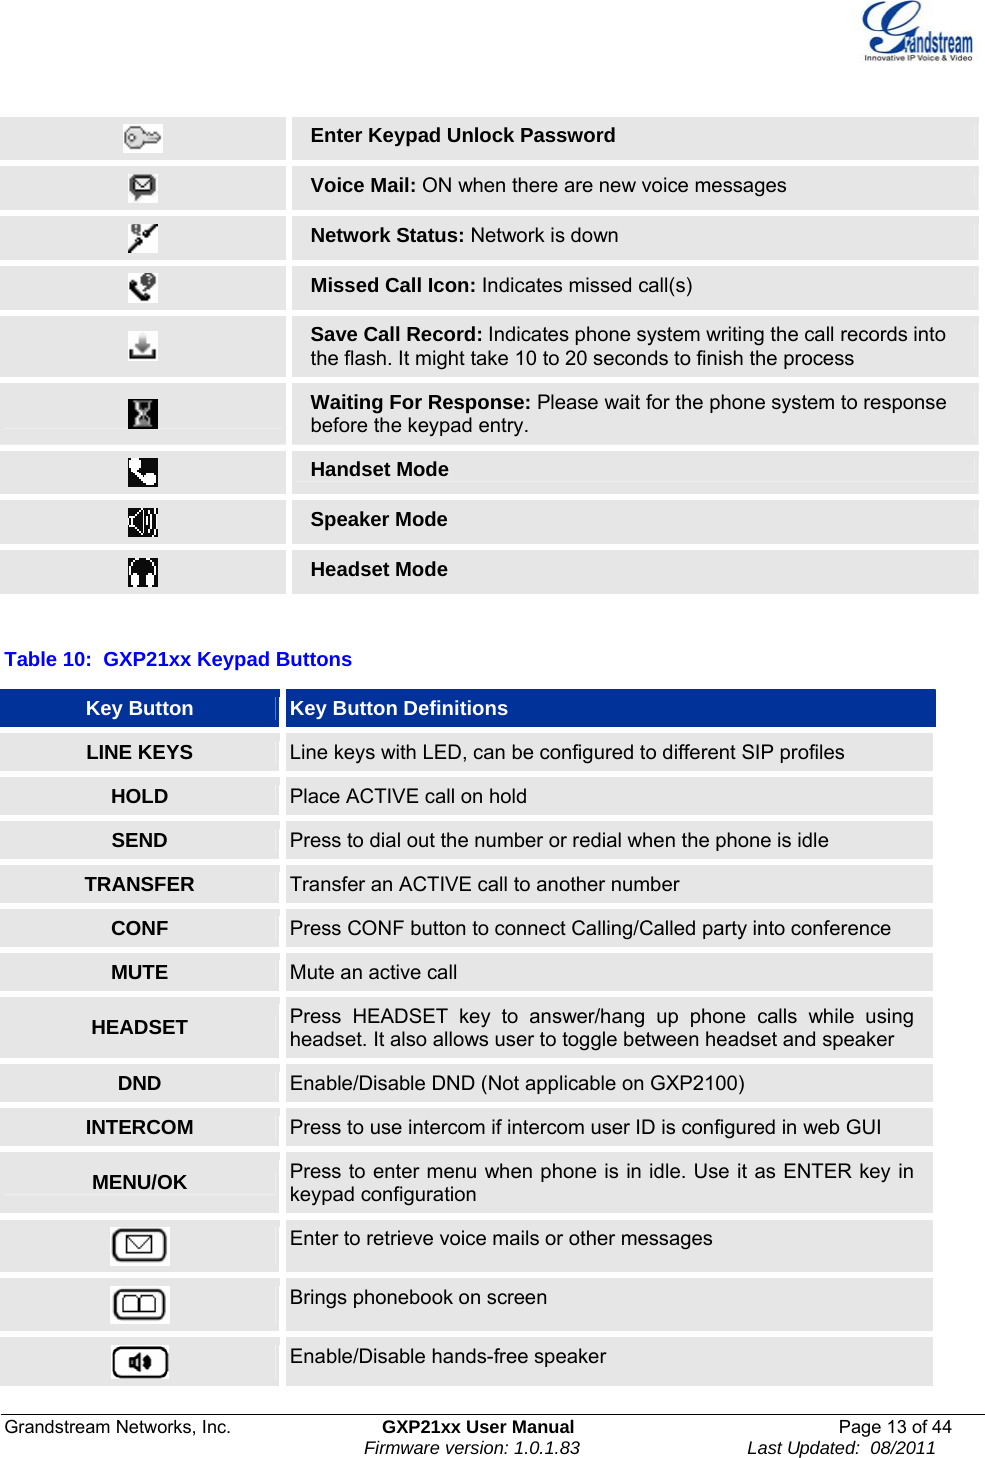  Grandstream Networks, Inc.  GXP21xx User Manual  Page 13 of 44                                                                Firmware version: 1.0.1.83                                 Last Updated:  08/2011   Enter Keypad Unlock Password  Voice Mail: ON when there are new voice messages  Network Status: Network is down  Missed Call Icon: Indicates missed call(s)  Save Call Record: Indicates phone system writing the call records into the flash. It might take 10 to 20 seconds to finish the process  Waiting For Response: Please wait for the phone system to response before the keypad entry.  Handset Mode  Speaker Mode  Headset Mode  Table 10:  GXP21xx Keypad Buttons Key Button  Key Button Definitions LINE KEYS  Line keys with LED, can be configured to different SIP profiles HOLD  Place ACTIVE call on hold SEND  Press to dial out the number or redial when the phone is idle TRANSFER  Transfer an ACTIVE call to another number CONF  Press CONF button to connect Calling/Called party into conference MUTE  Mute an active call HEADSET  Press HEADSET key to answer/hang up phone calls while using headset. It also allows user to toggle between headset and speaker DND  Enable/Disable DND (Not applicable on GXP2100) INTERCOM  Press to use intercom if intercom user ID is configured in web GUI MENU/OK  Press to enter menu when phone is in idle. Use it as ENTER key in keypad configuration  Enter to retrieve voice mails or other messages  Brings phonebook on screen  Enable/Disable hands-free speaker 